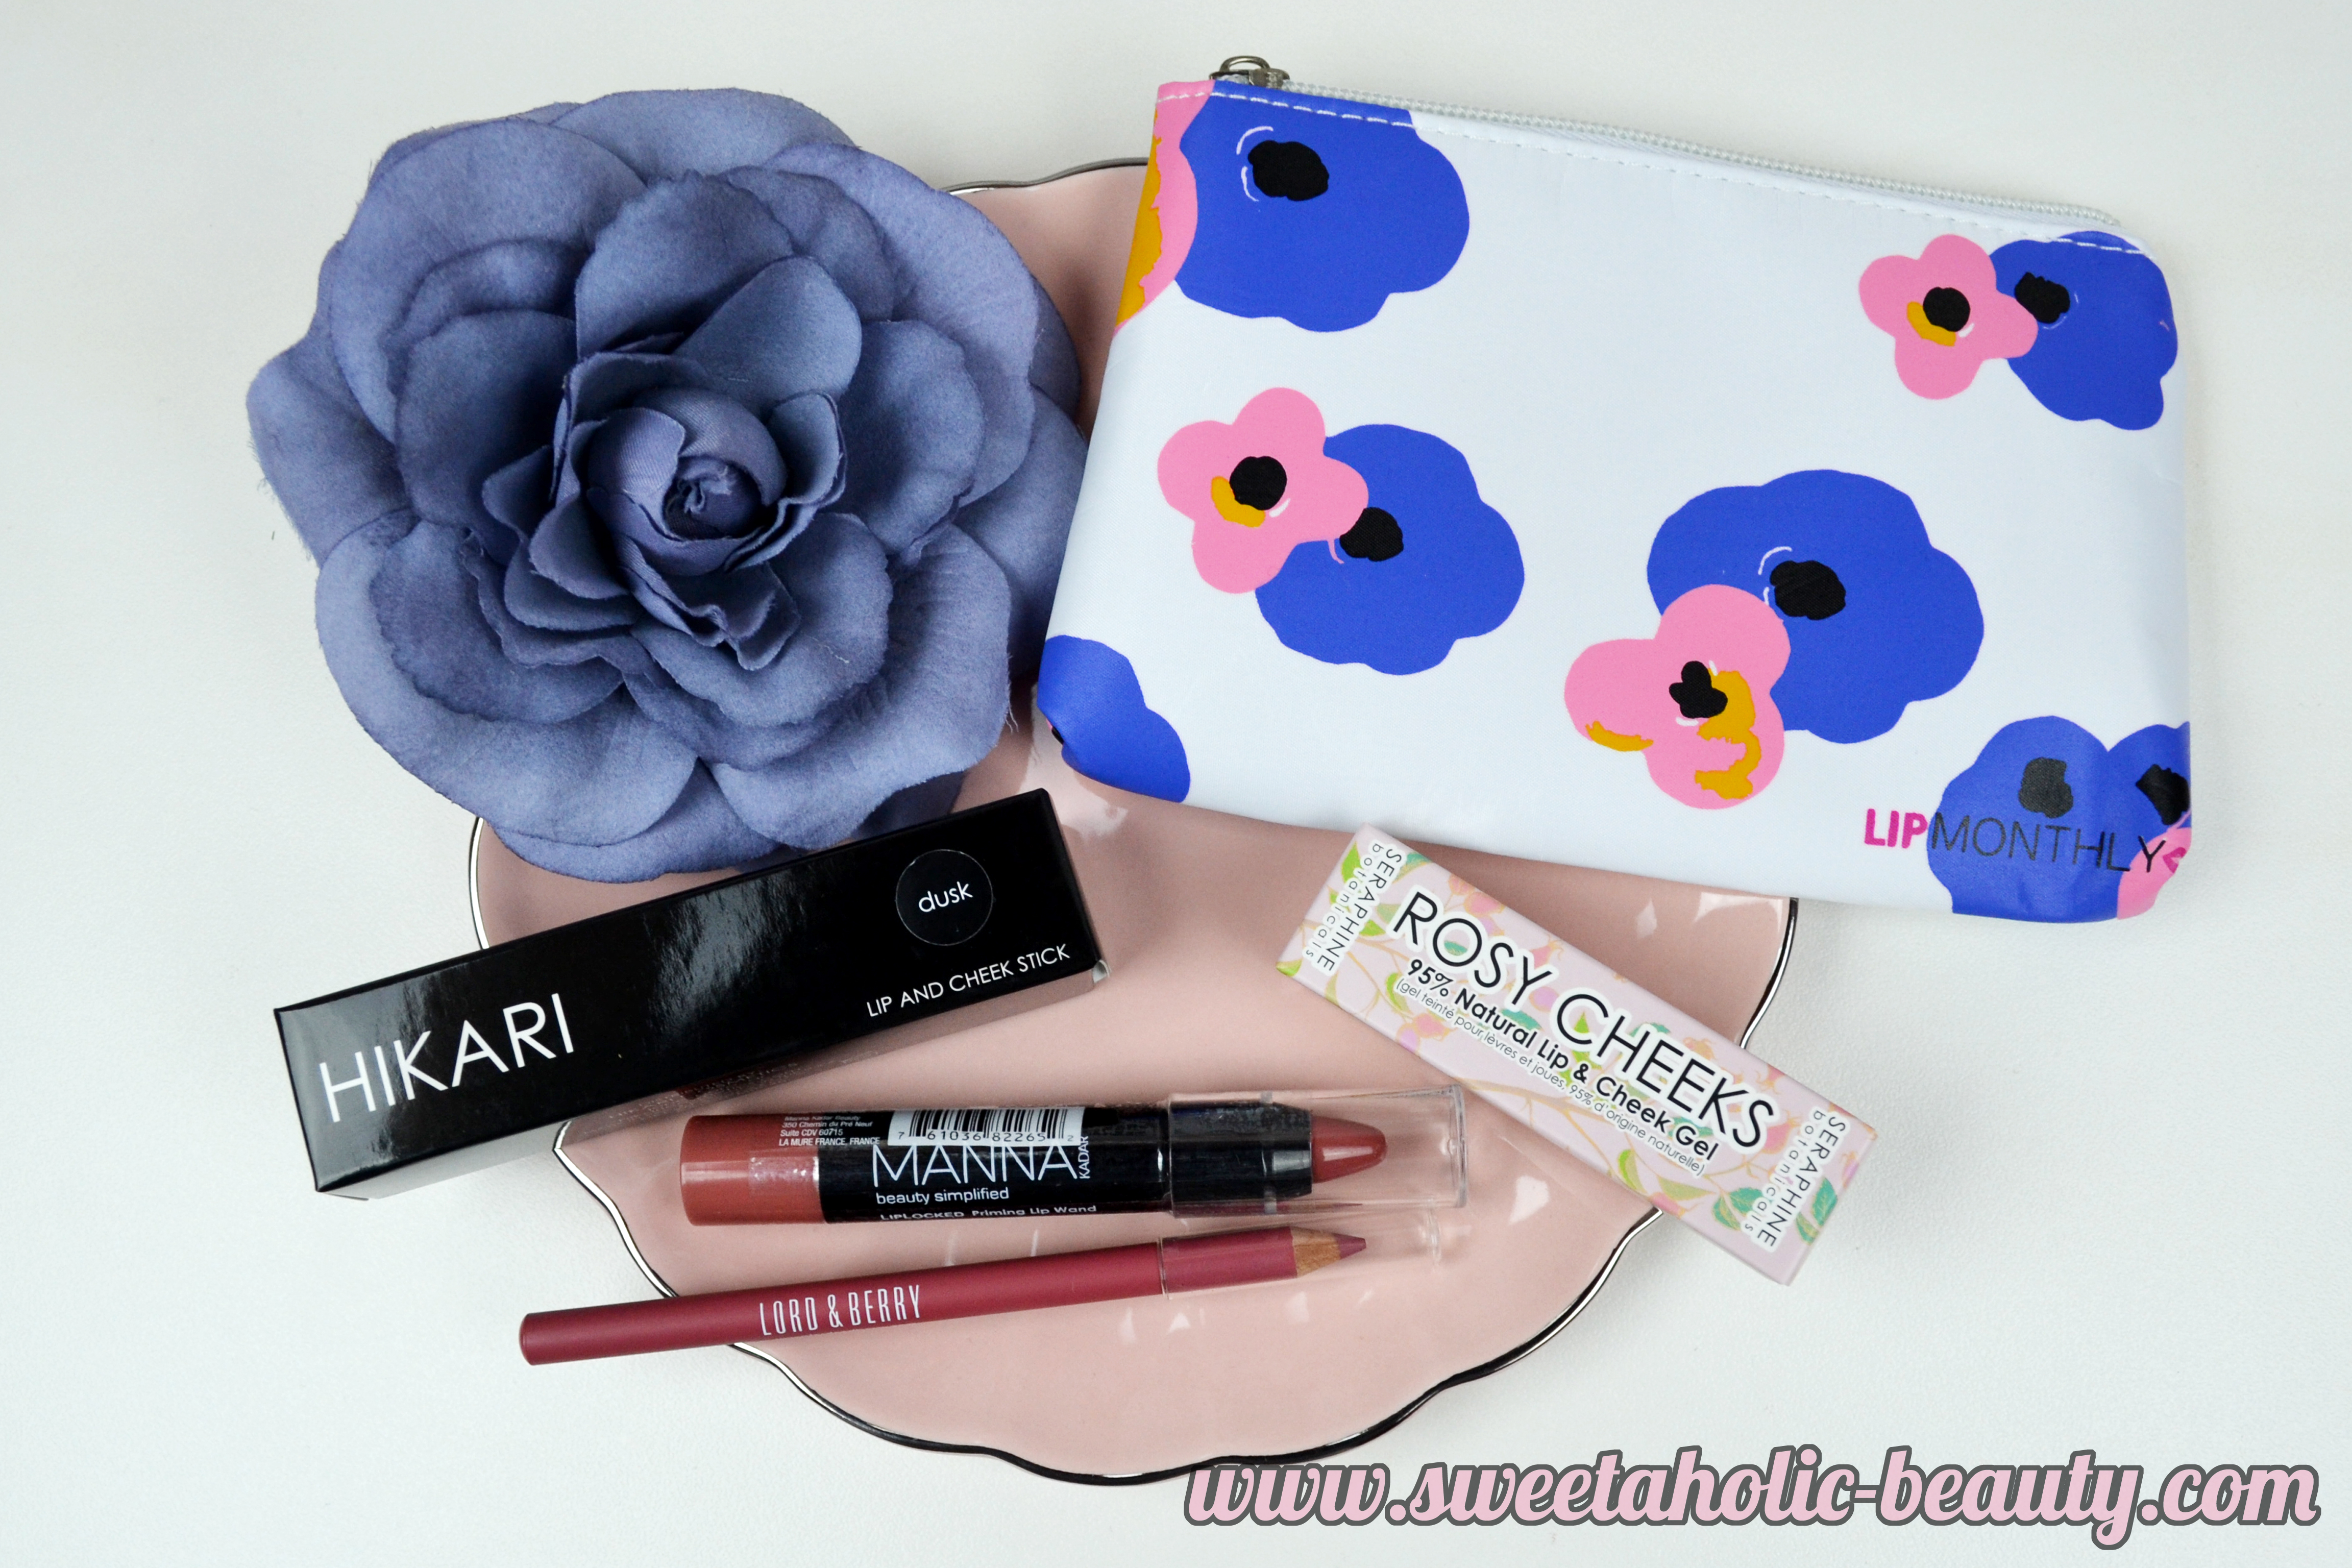 August Lip Monthly - Sweetaholic Beauty